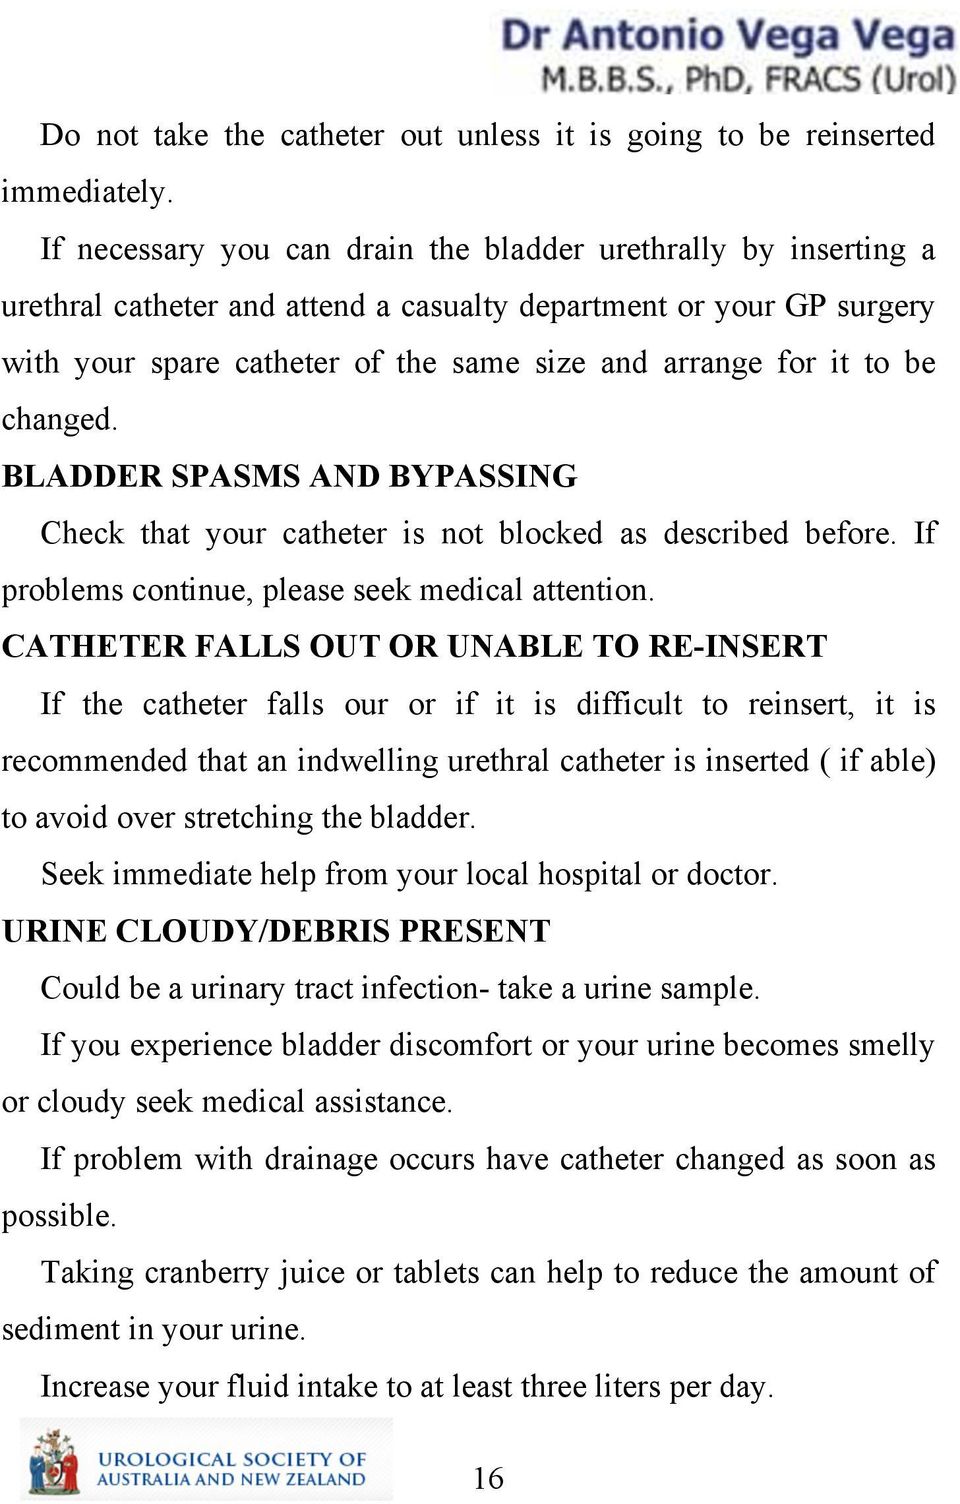 be changed. BLADDER SPASMS AND BYPASSING Check that your catheter is not blocked as described before. If problems continue, please seek medical attention.